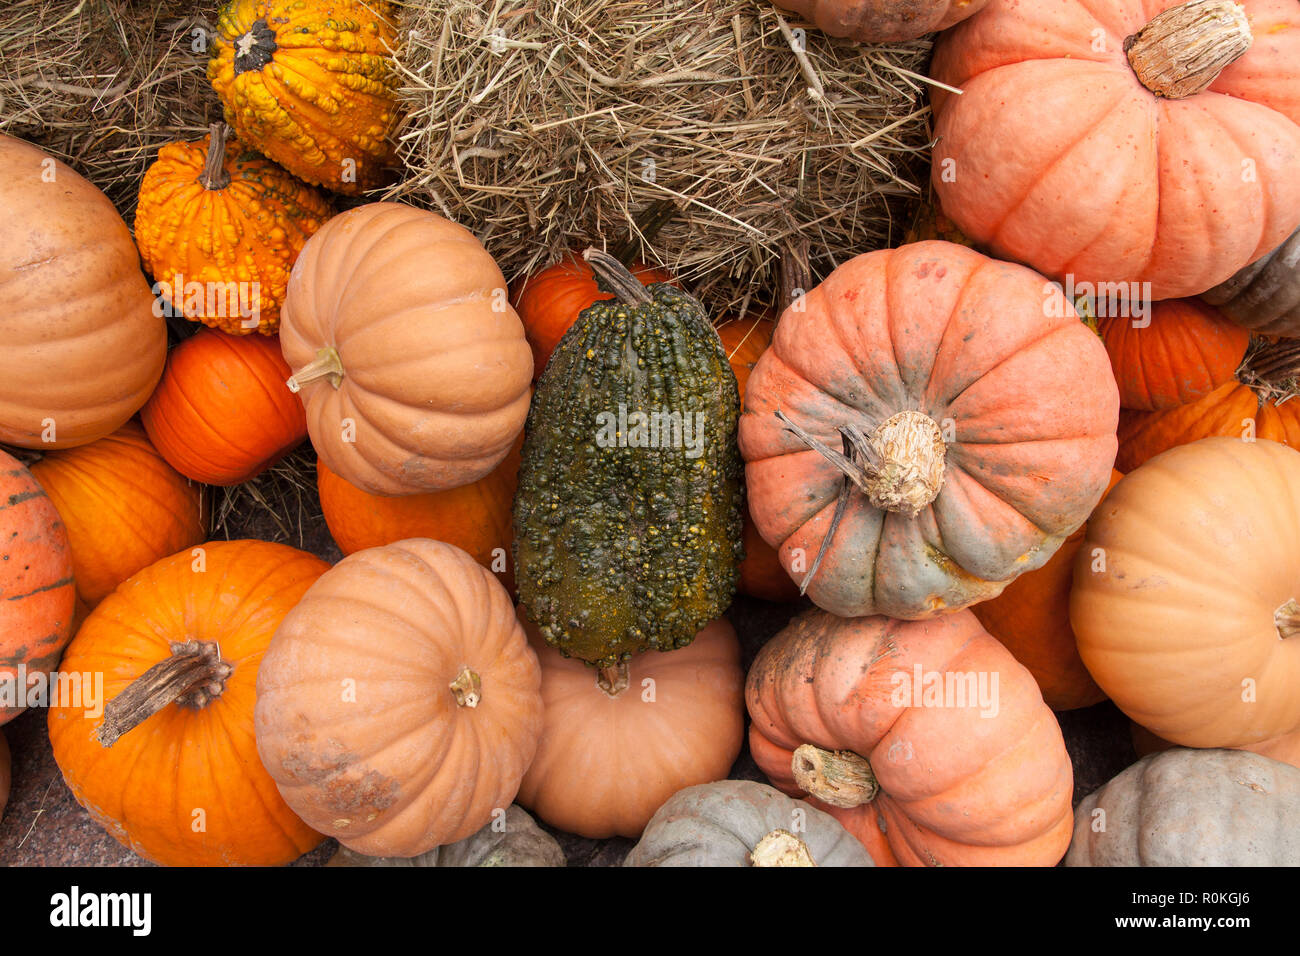 Pumpkin display at Broadway Bites a pop-up in summer and fall, Greeley Square, showcasing a diverse mix of cuisines from local chefs, New York, U.S.A Stock Photo